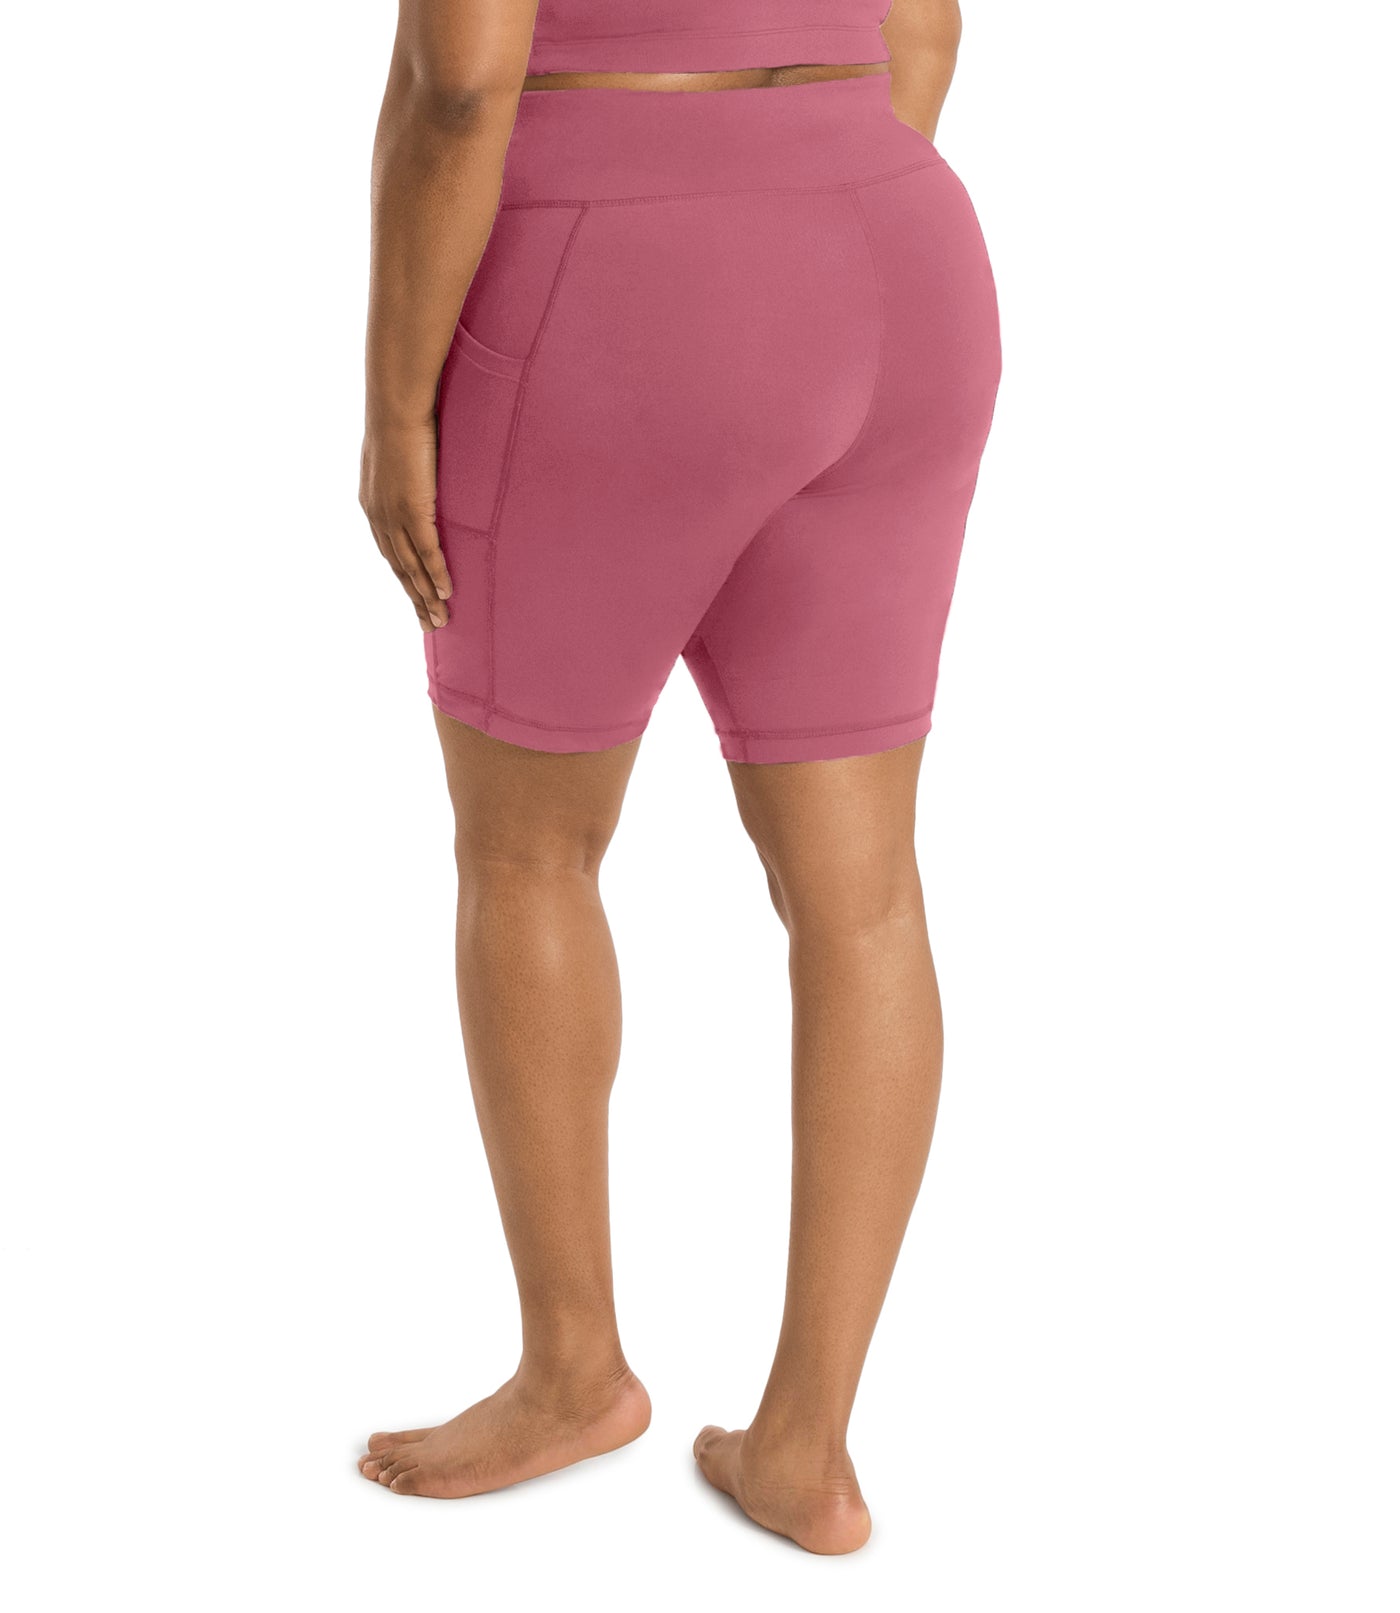 Plus size woman, back view with hands by side, wearing JunoActive JunoStretch Side Pocket Short in warm mauve. The hem is a few inches above the knee.